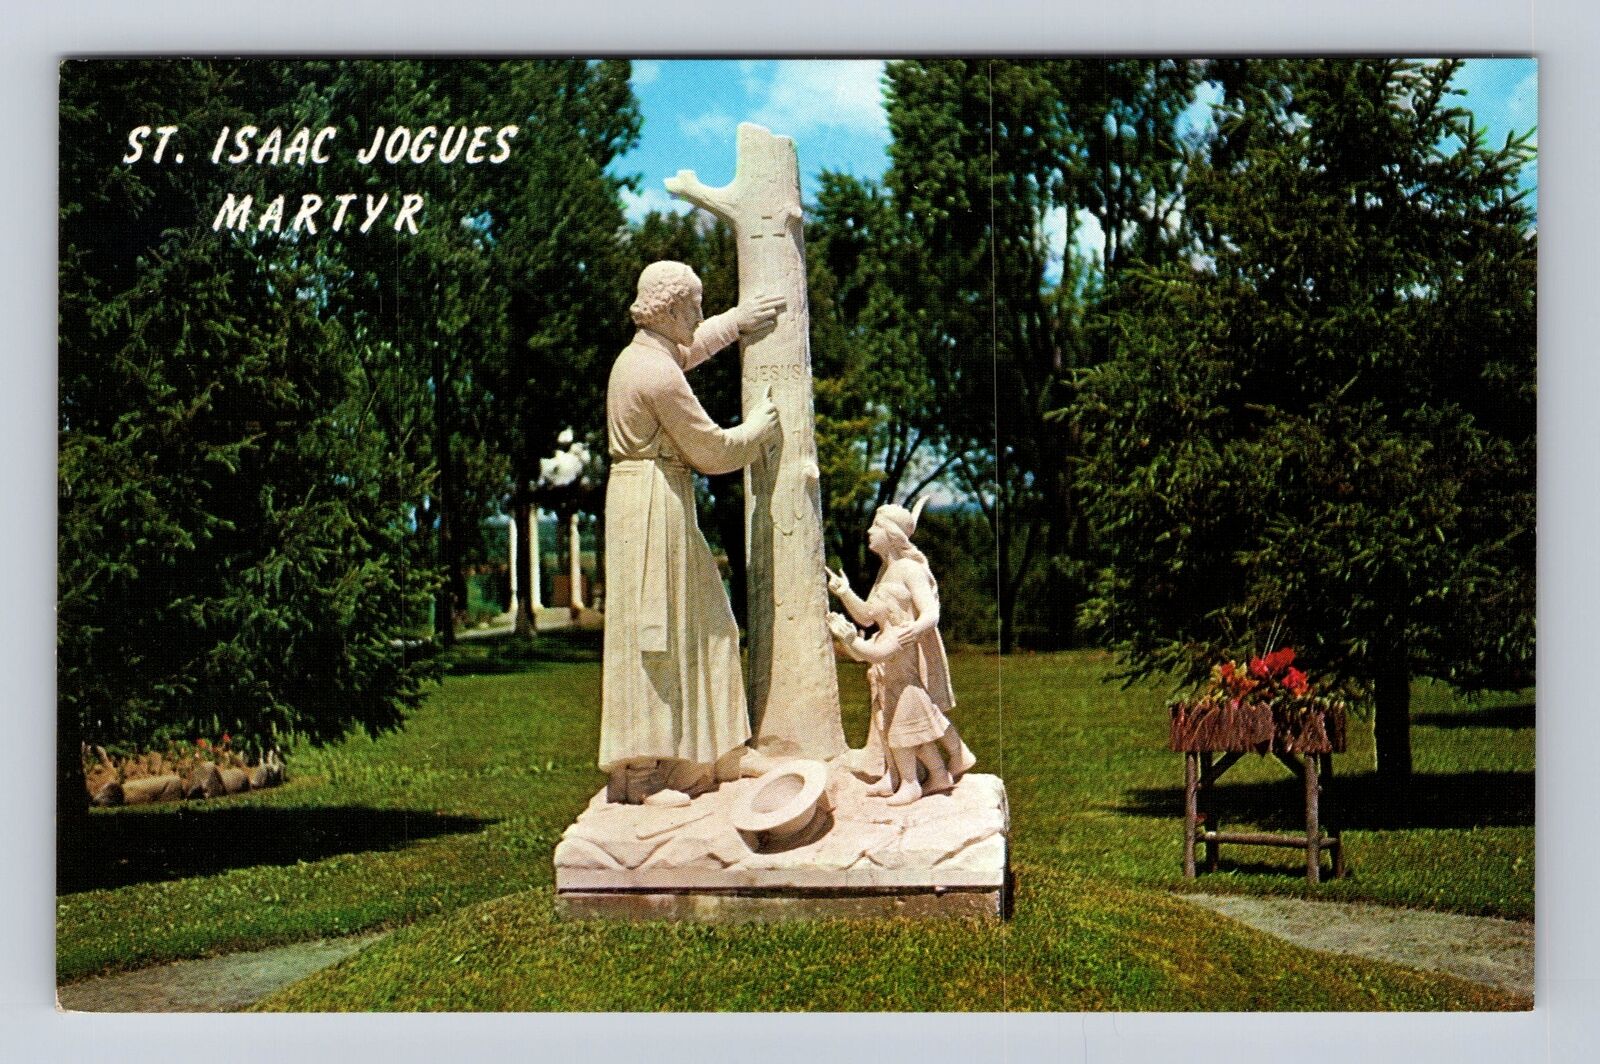 Auriesville NY-New York, Sir Isaac Jogues Statue, Martyr Shrine Vintage Postcard